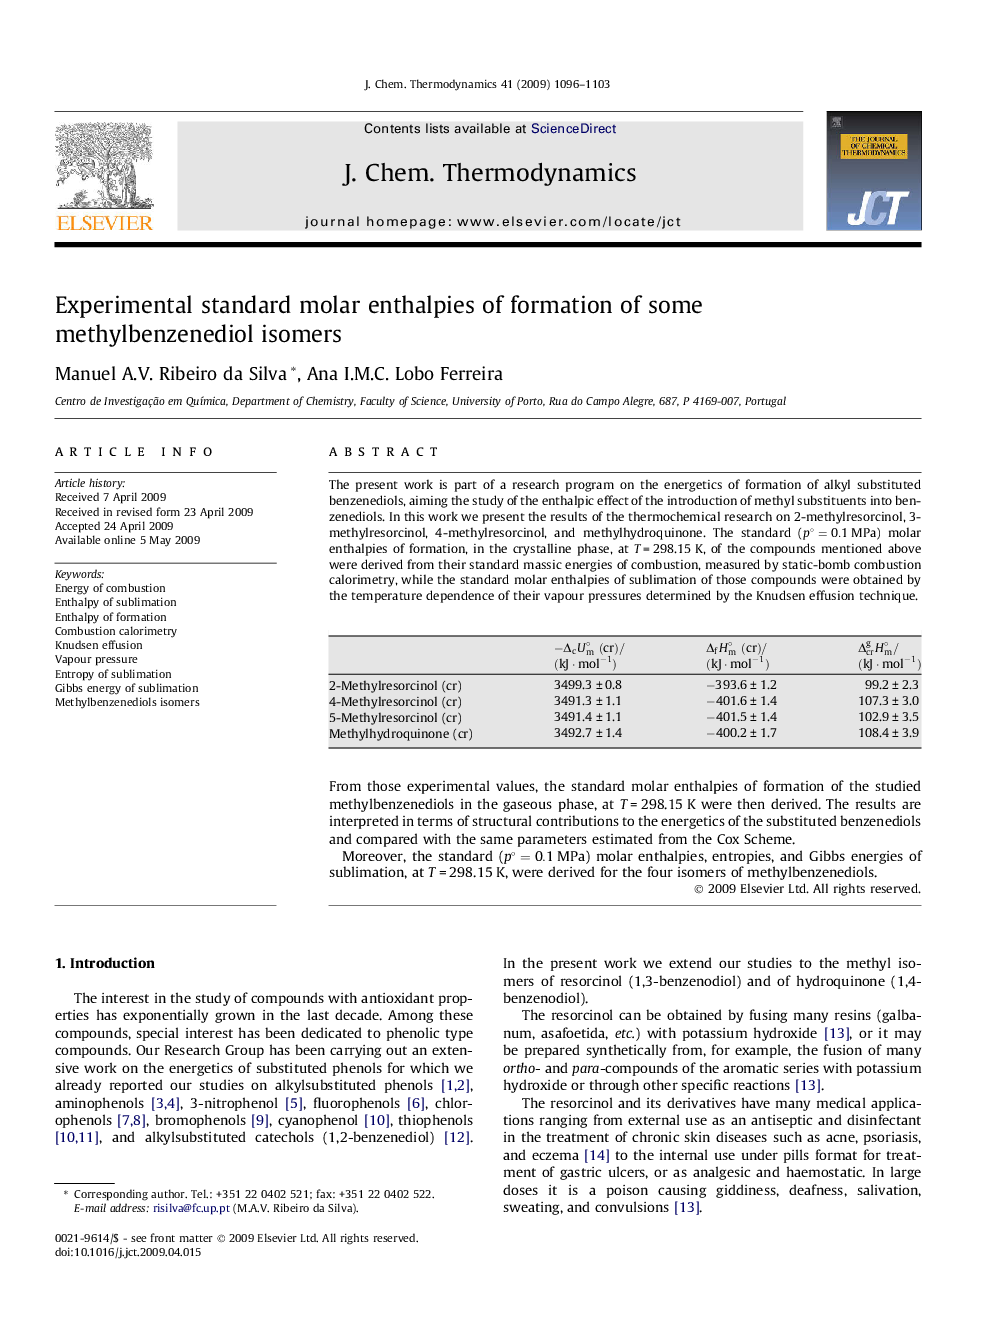 Experimental standard molar enthalpies of formation of some methylbenzenediol isomers